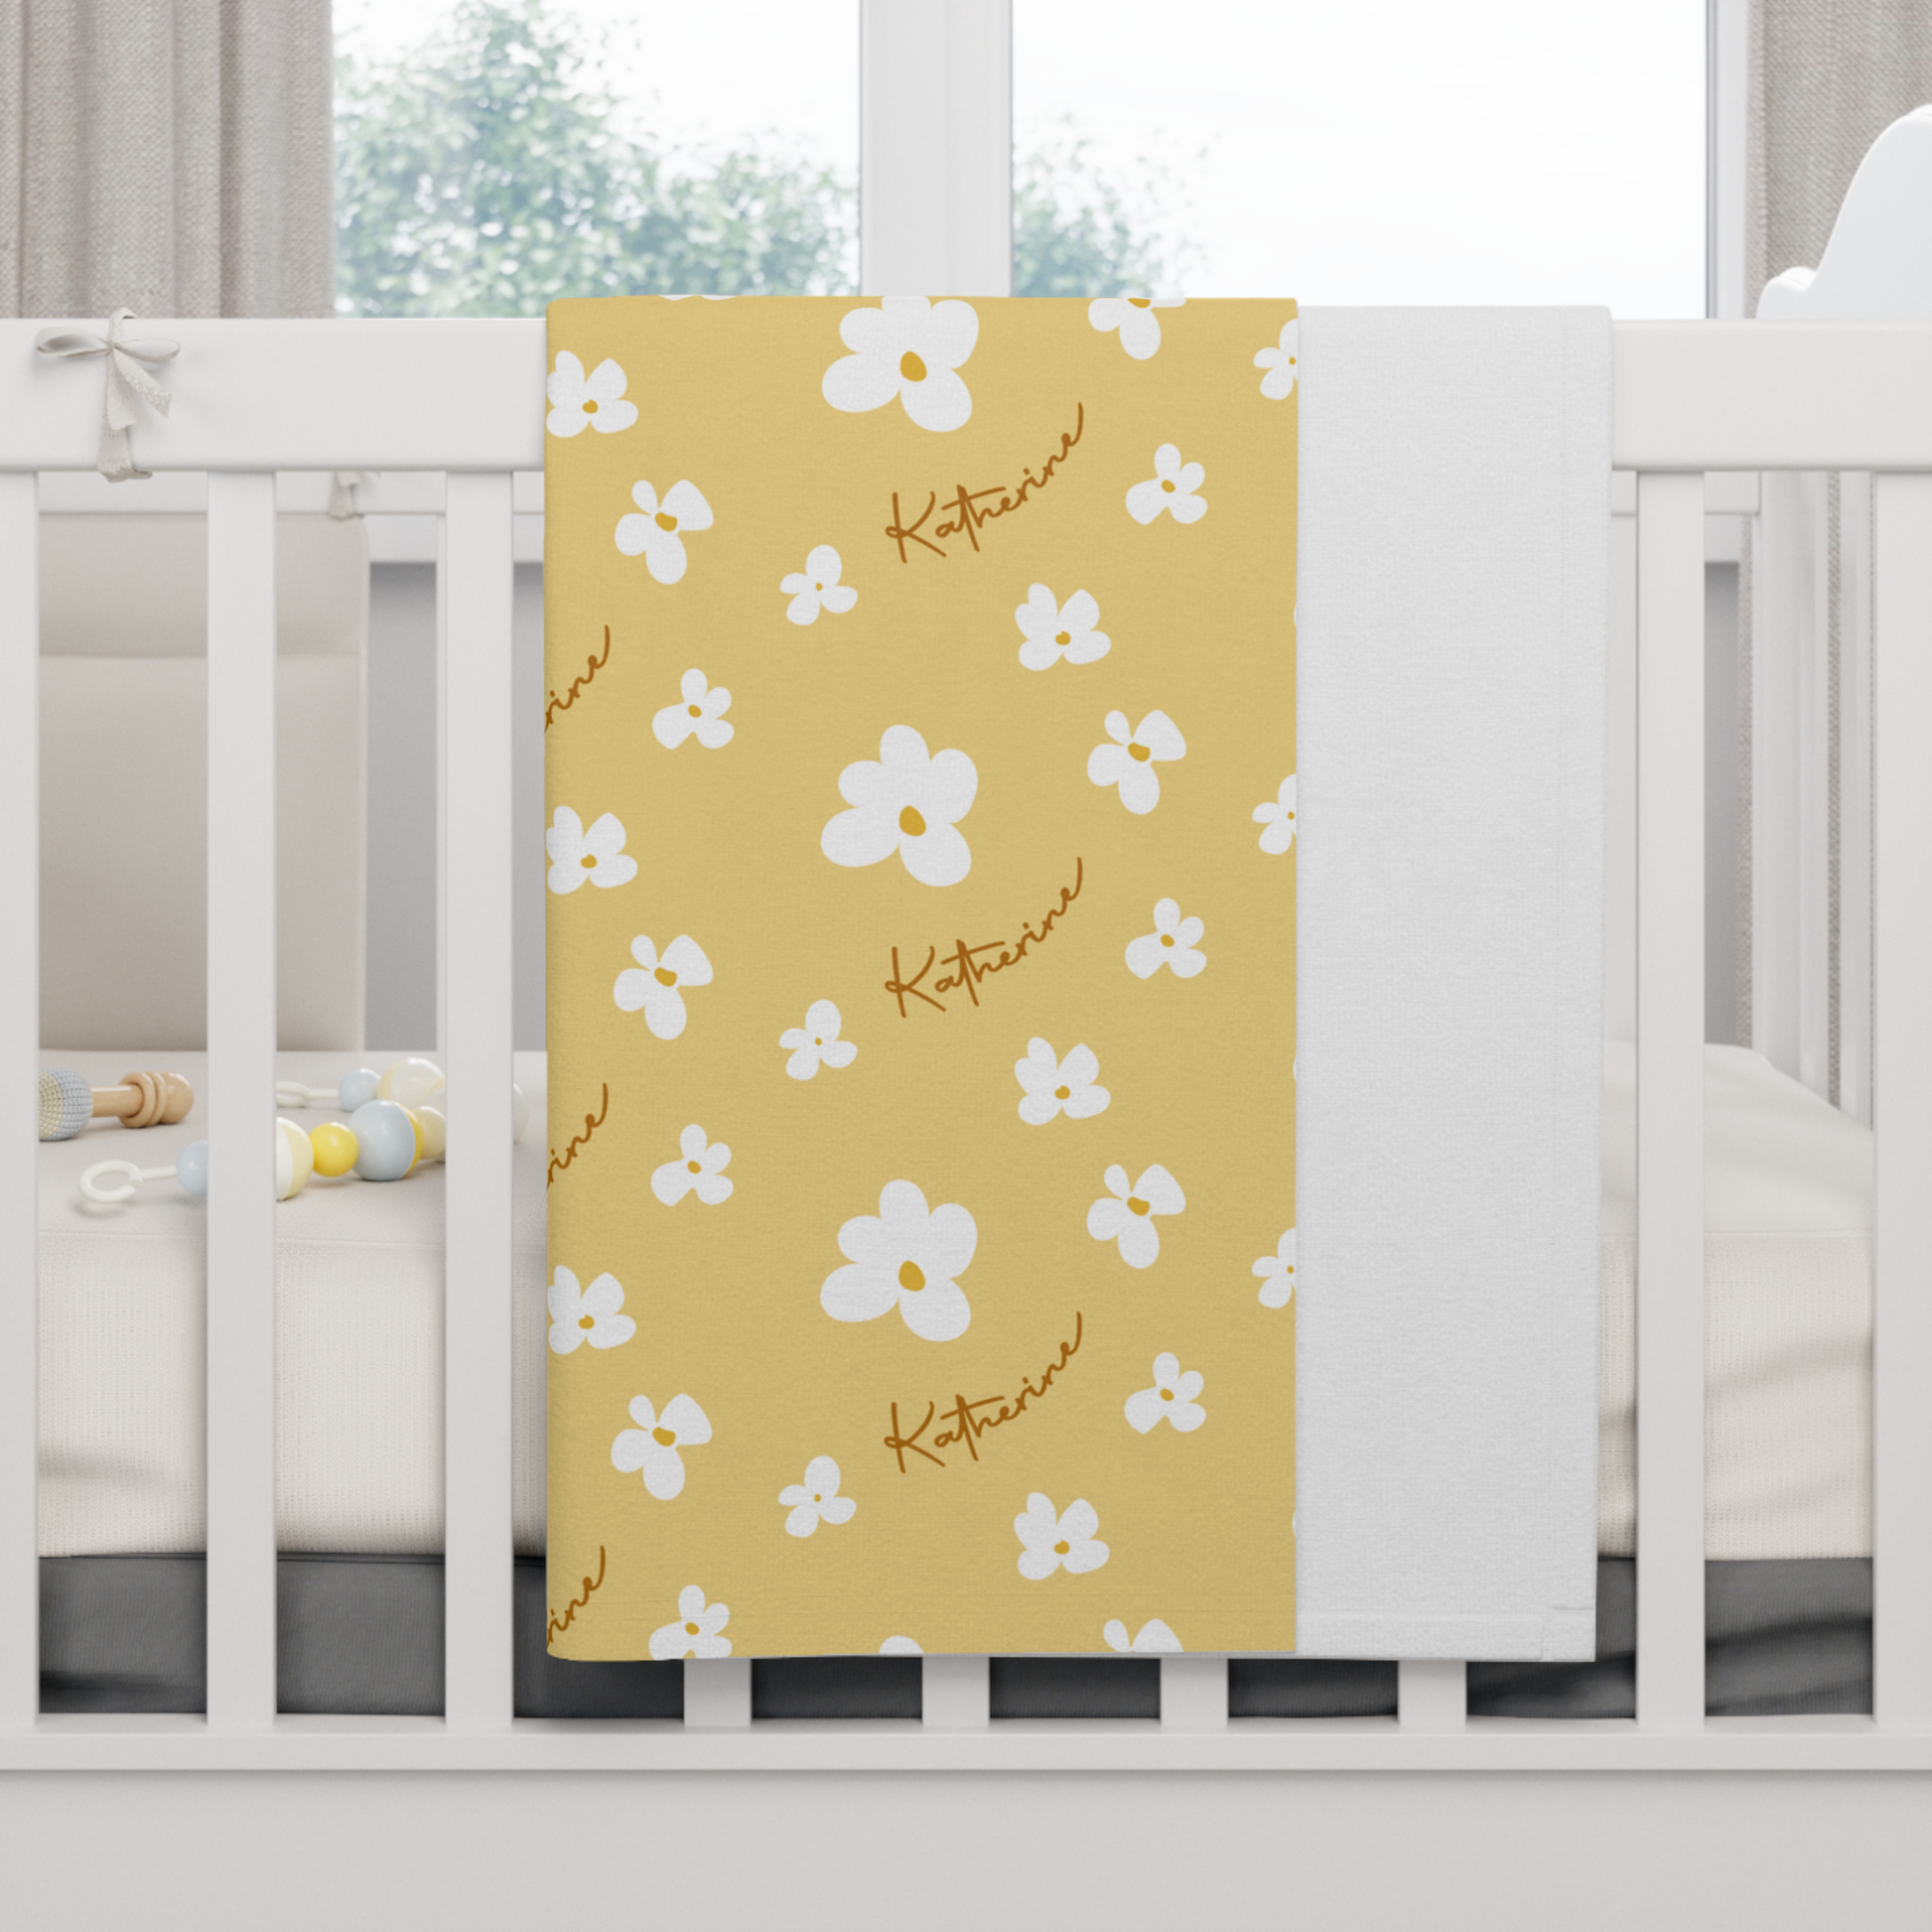 Fleece personalized baby blanket in yellow daisy pattern hung over side of white crib with window in the background